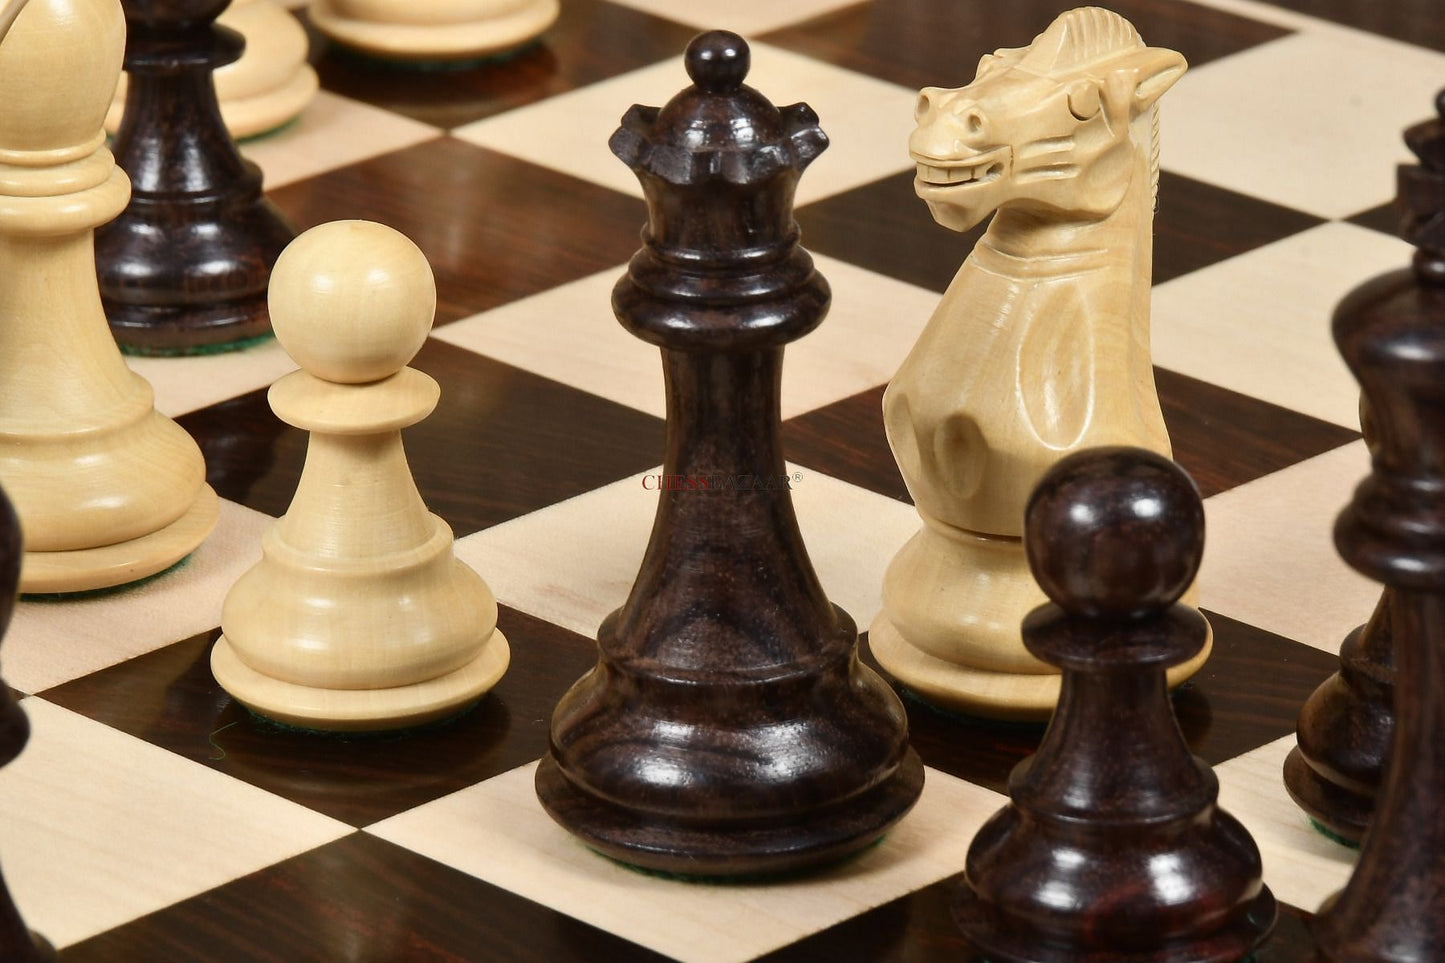 Desert Gold Staunton Series Wooden Chess Pieces in Rosewood & Box Wood - 4.0" King